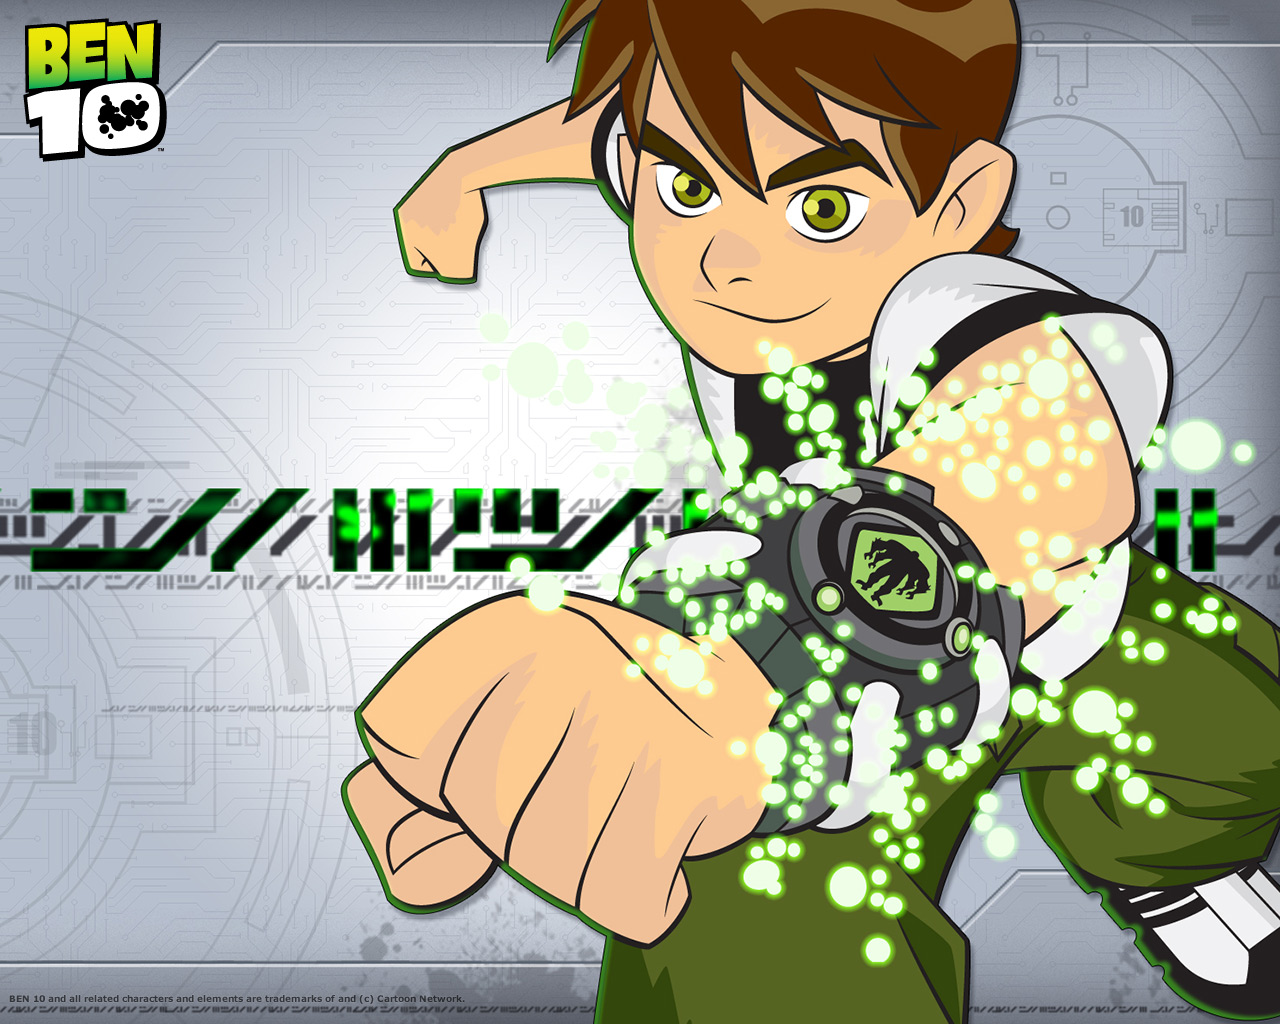 wallpaper ben 10 cartoon ben 10 cartoon wallpaper ben 10 characters ...